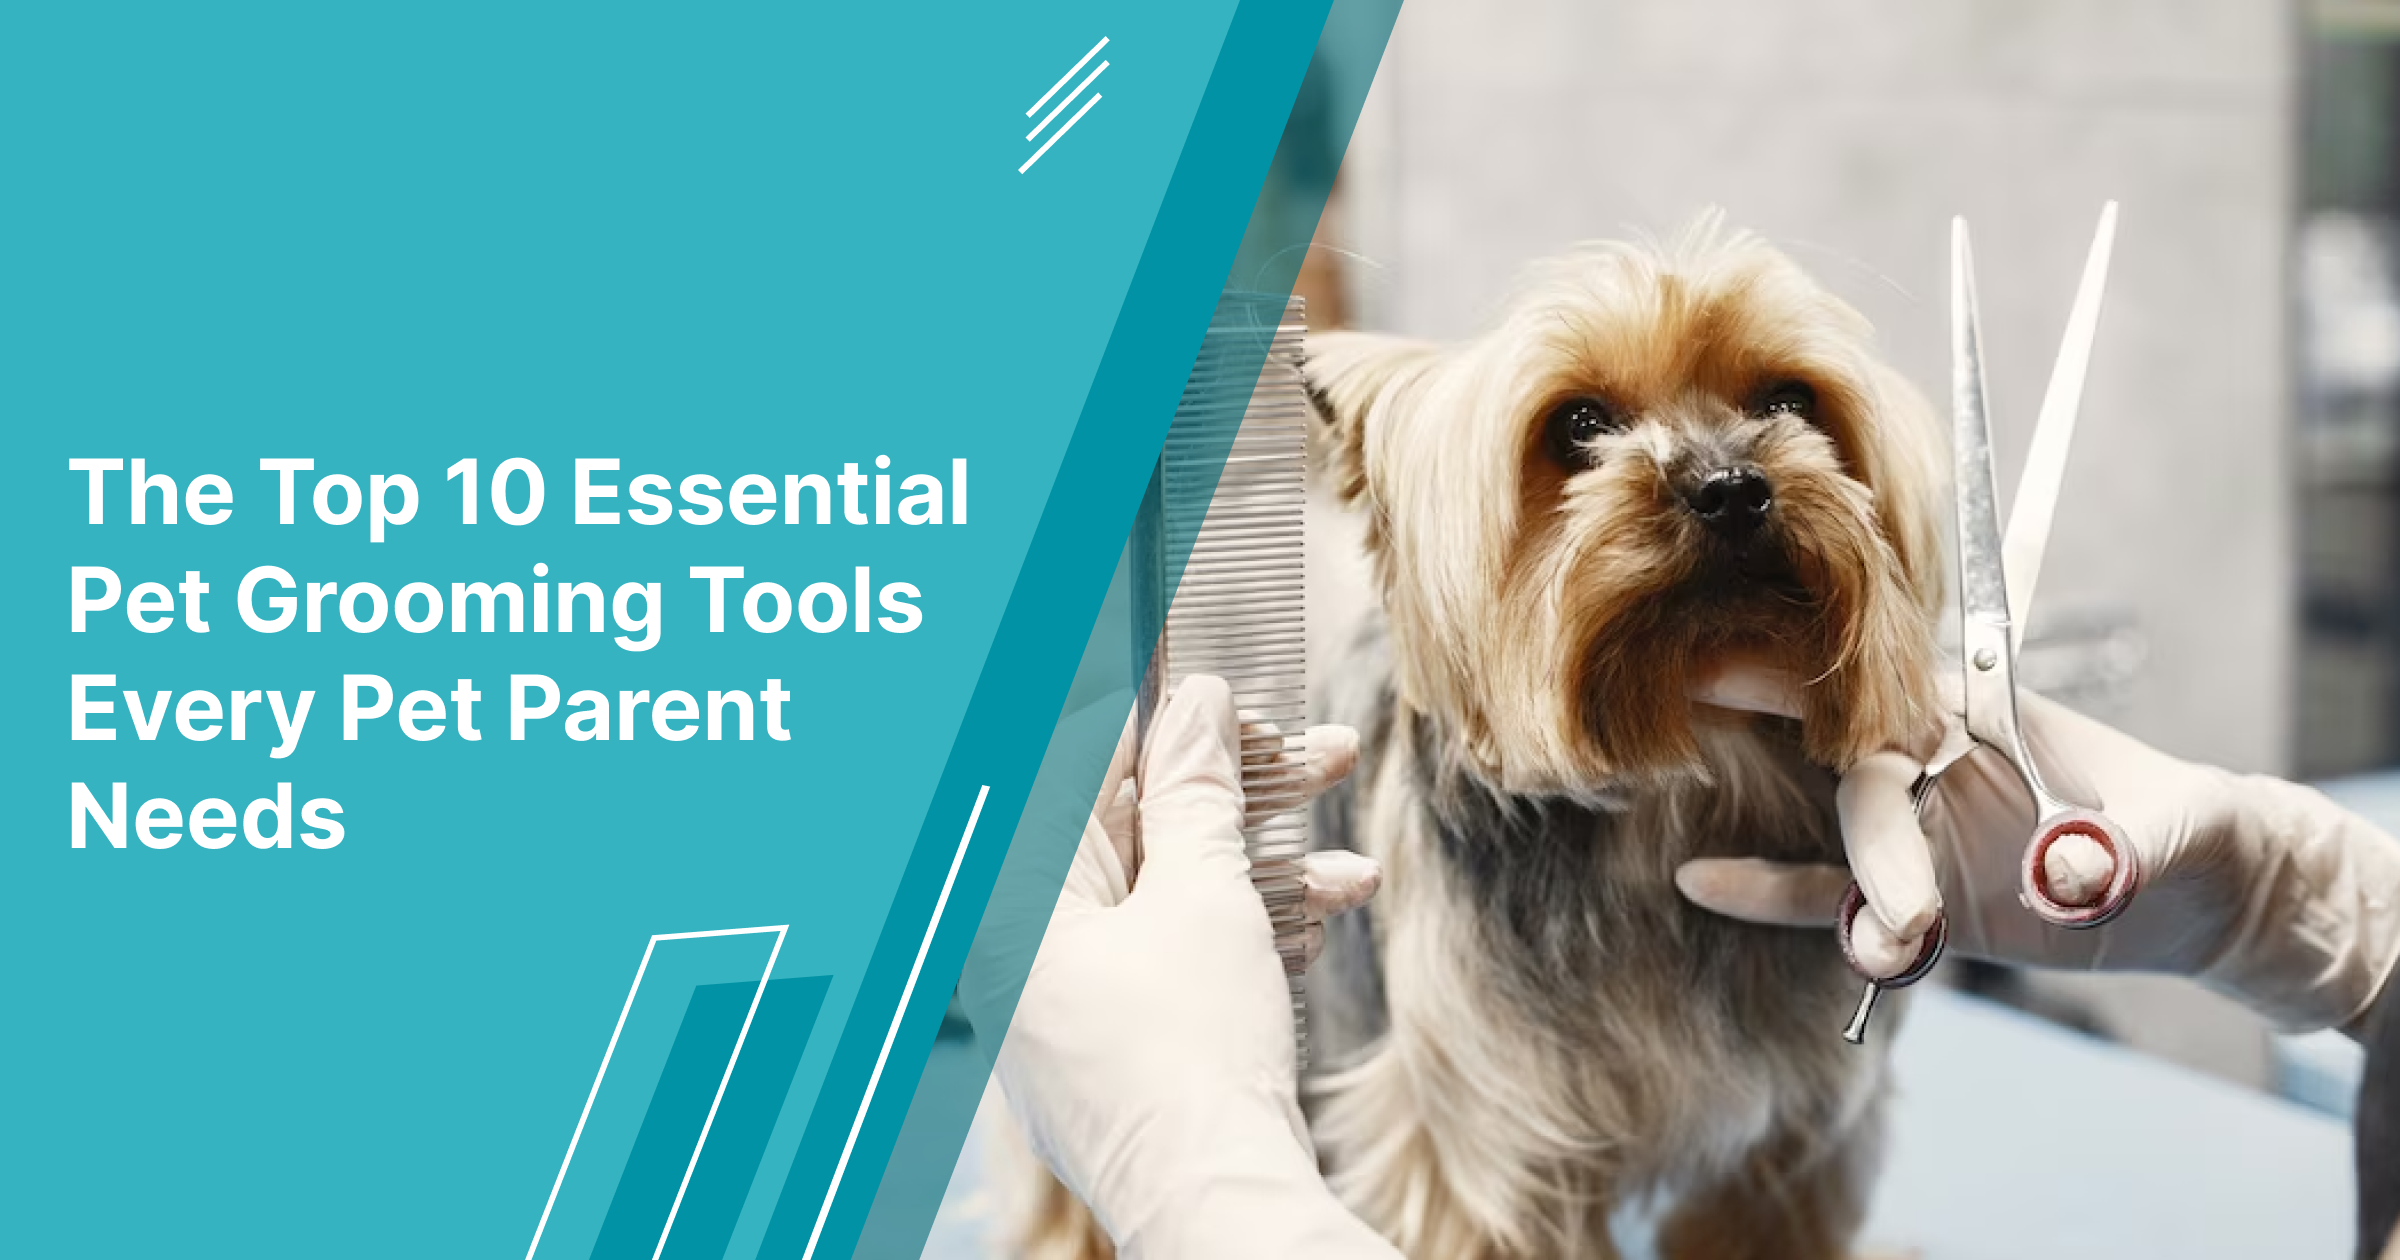 The Top 10 Essential Pet Grooming Tools Every Pet Parent Needs